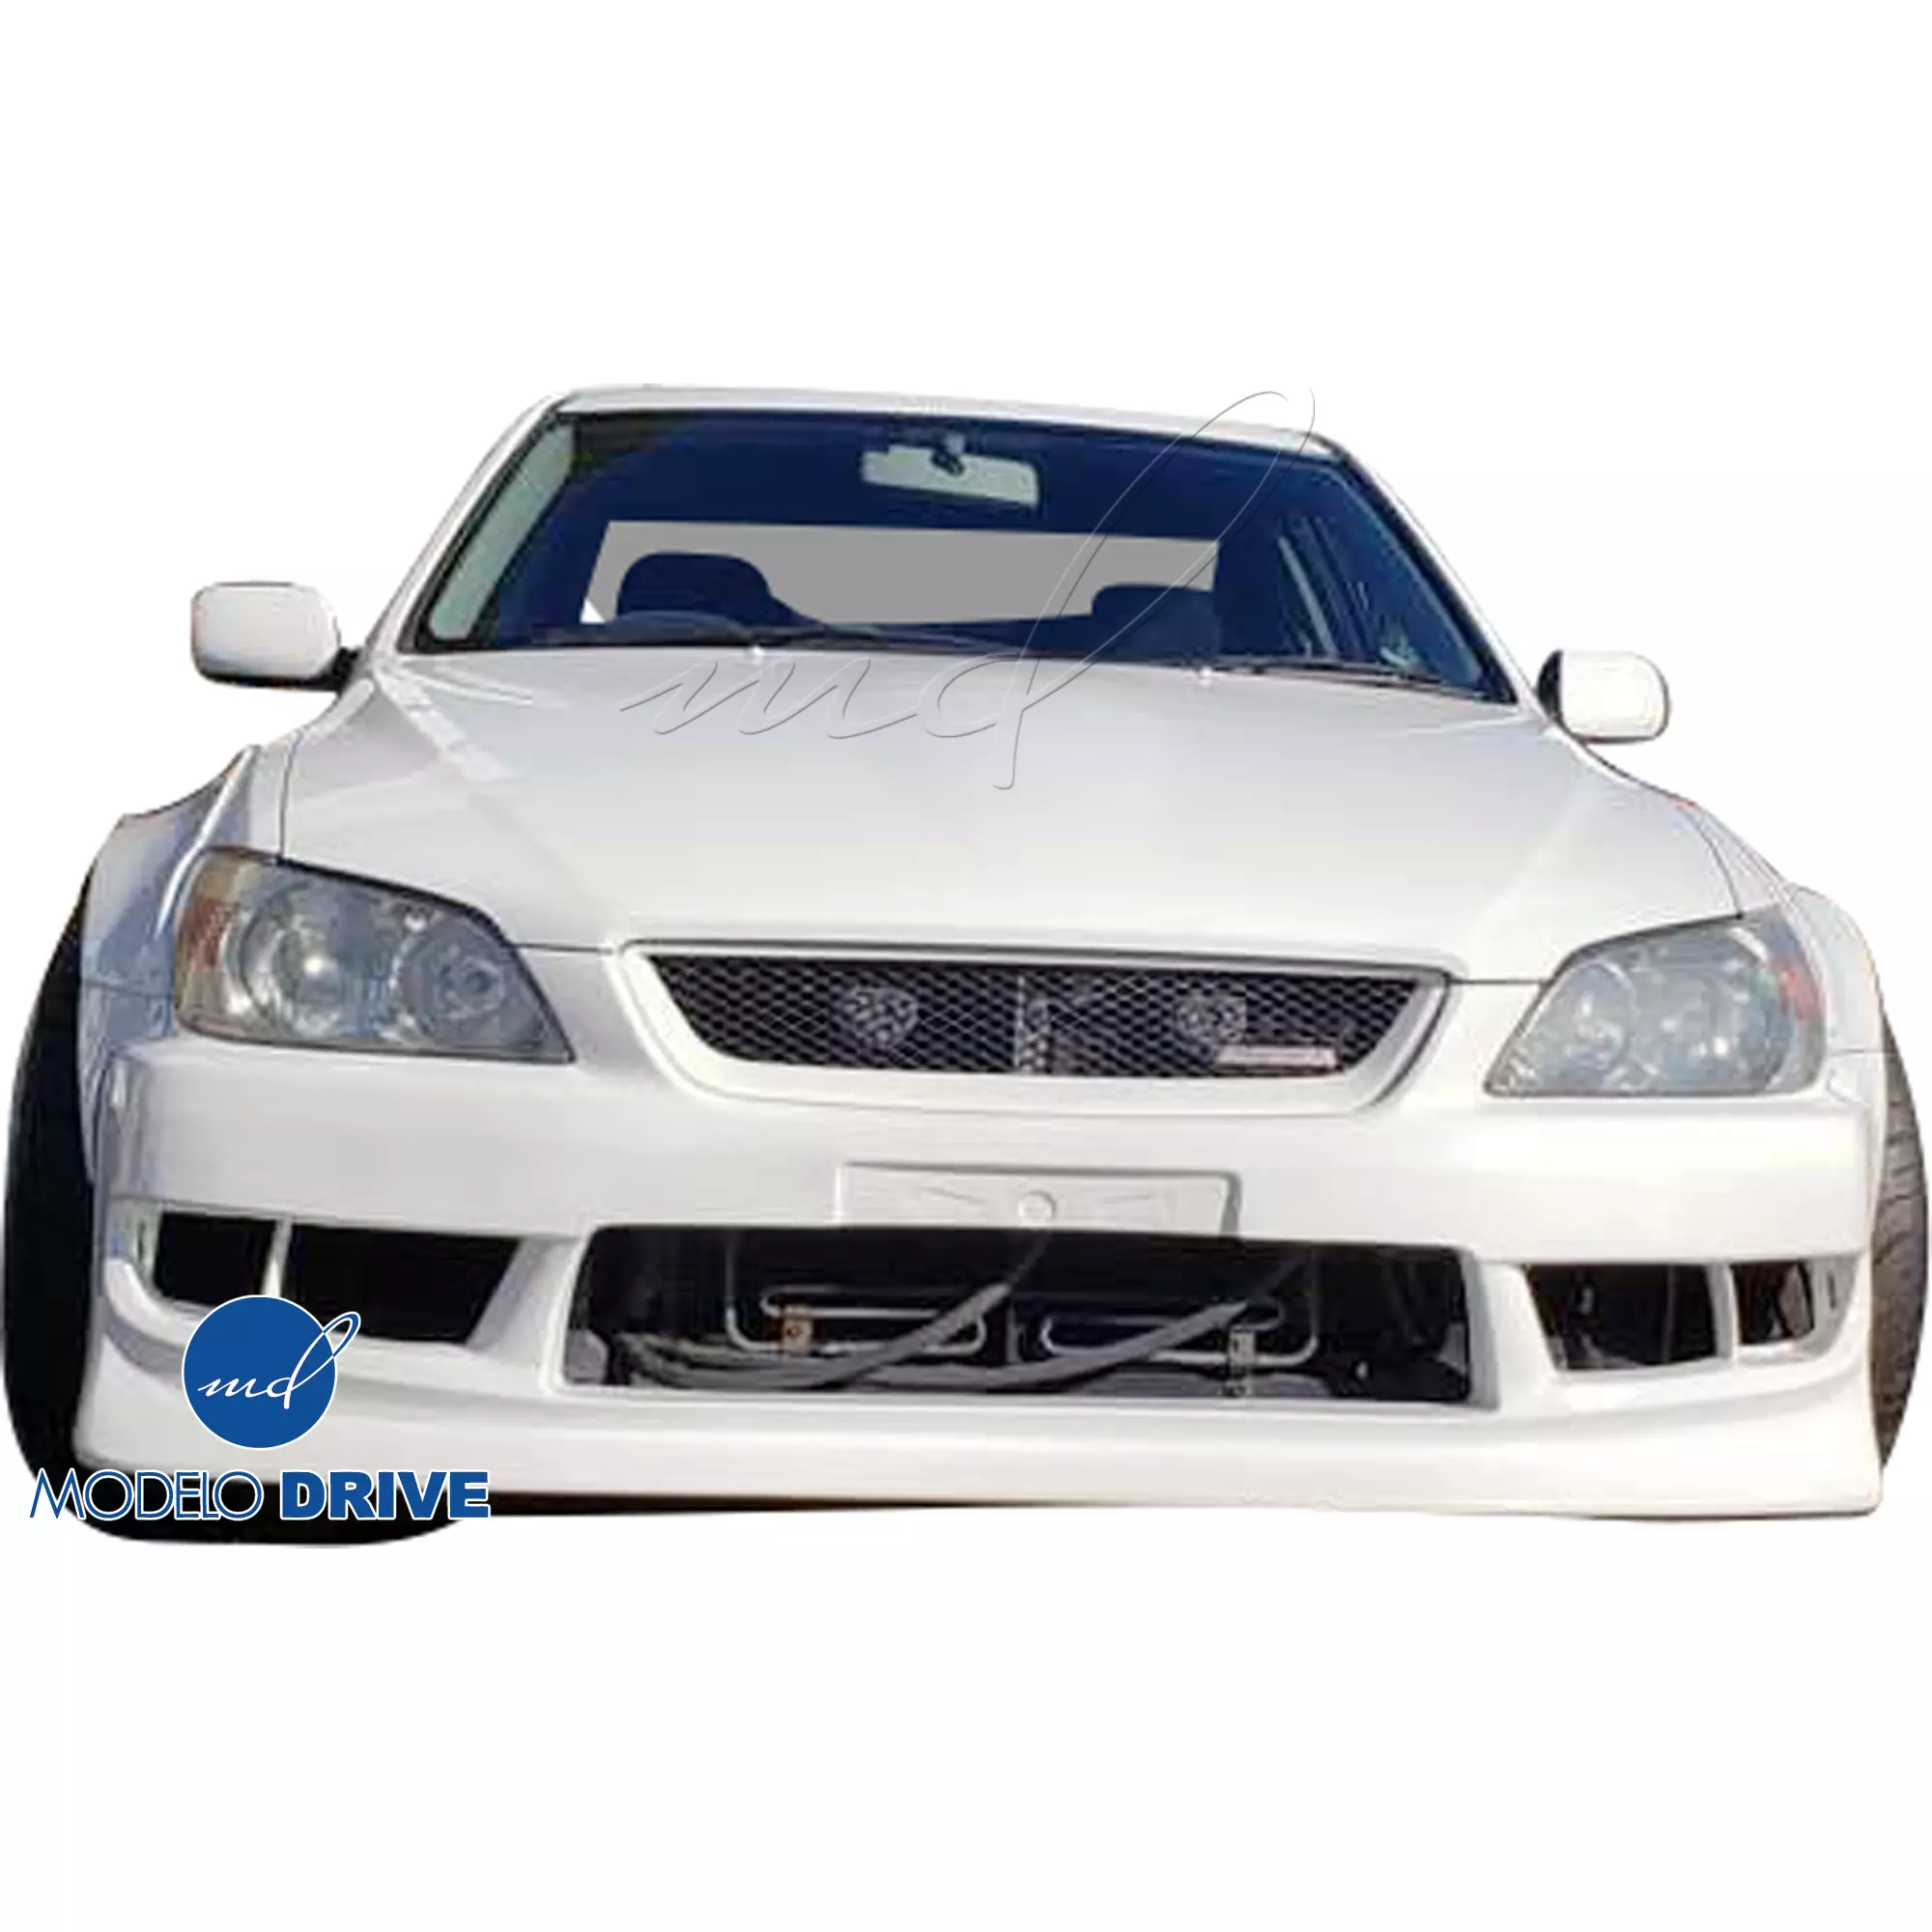 ModeloDrive FRP MSV Wide Body 30/65 Fender Flare Set 8pc > Lexus IS Series IS300 2000-2005> 4dr - Image 1